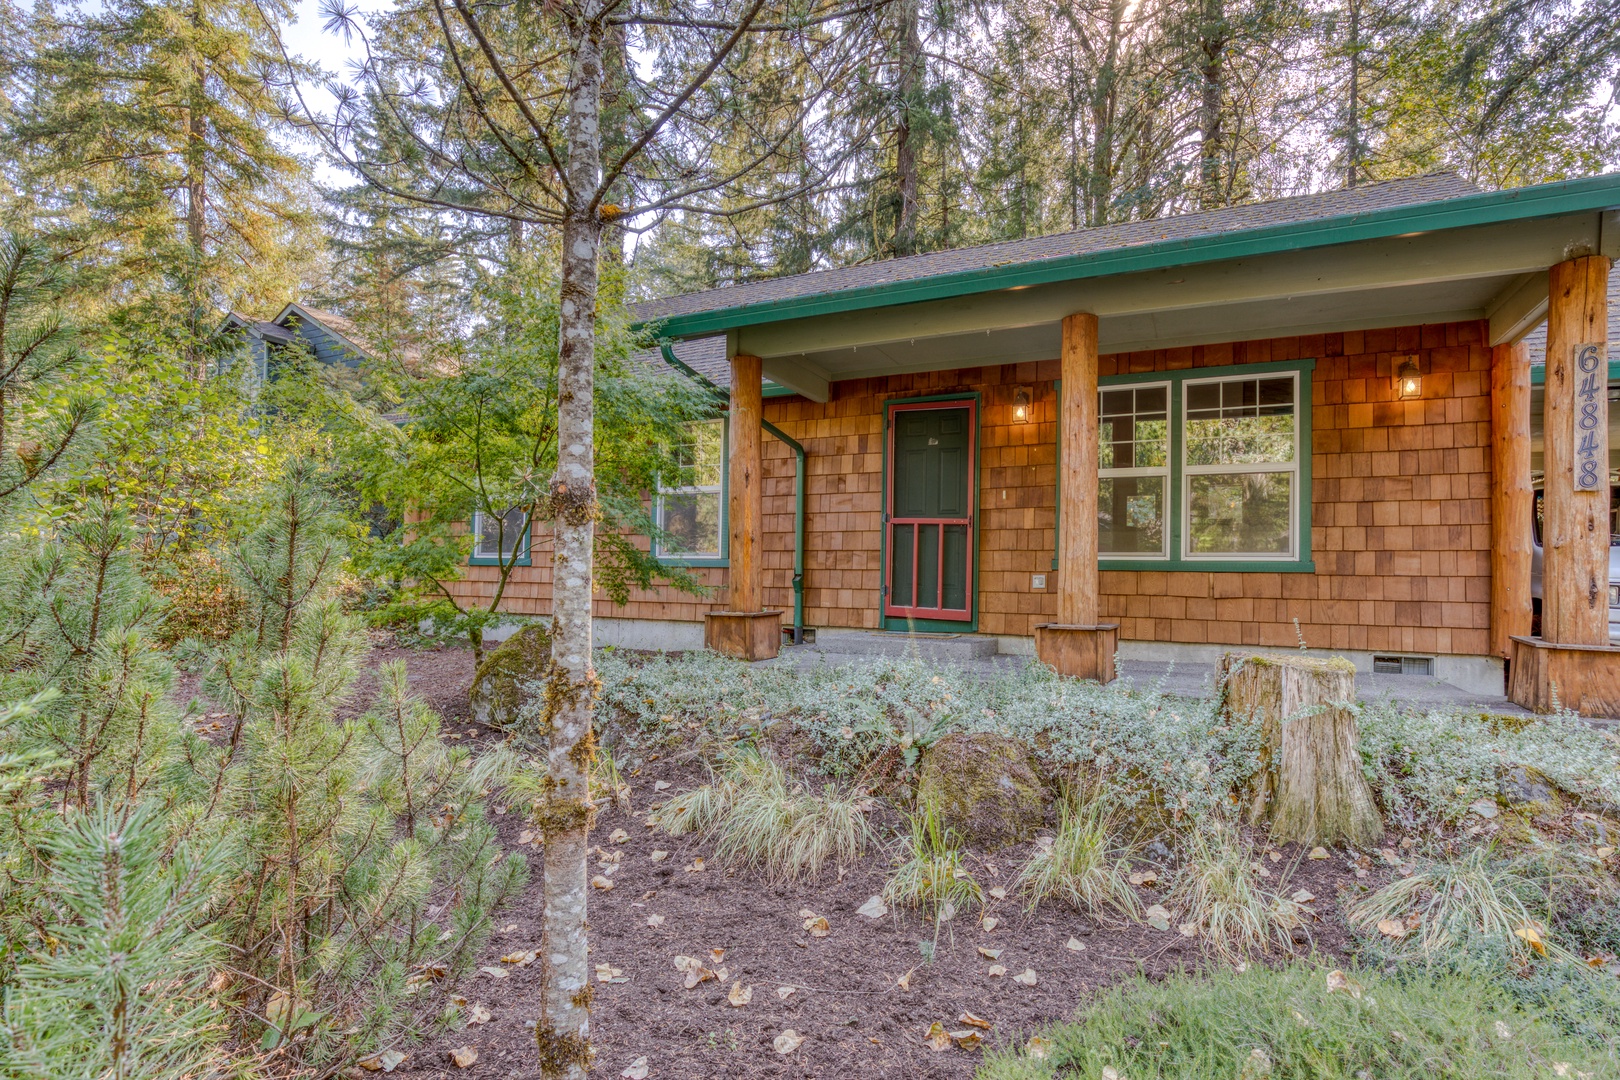 Brightwood Vacation Rentals, Riverside Retreat - Memories will live long after your enjoyable time at this Mt Hood cabin